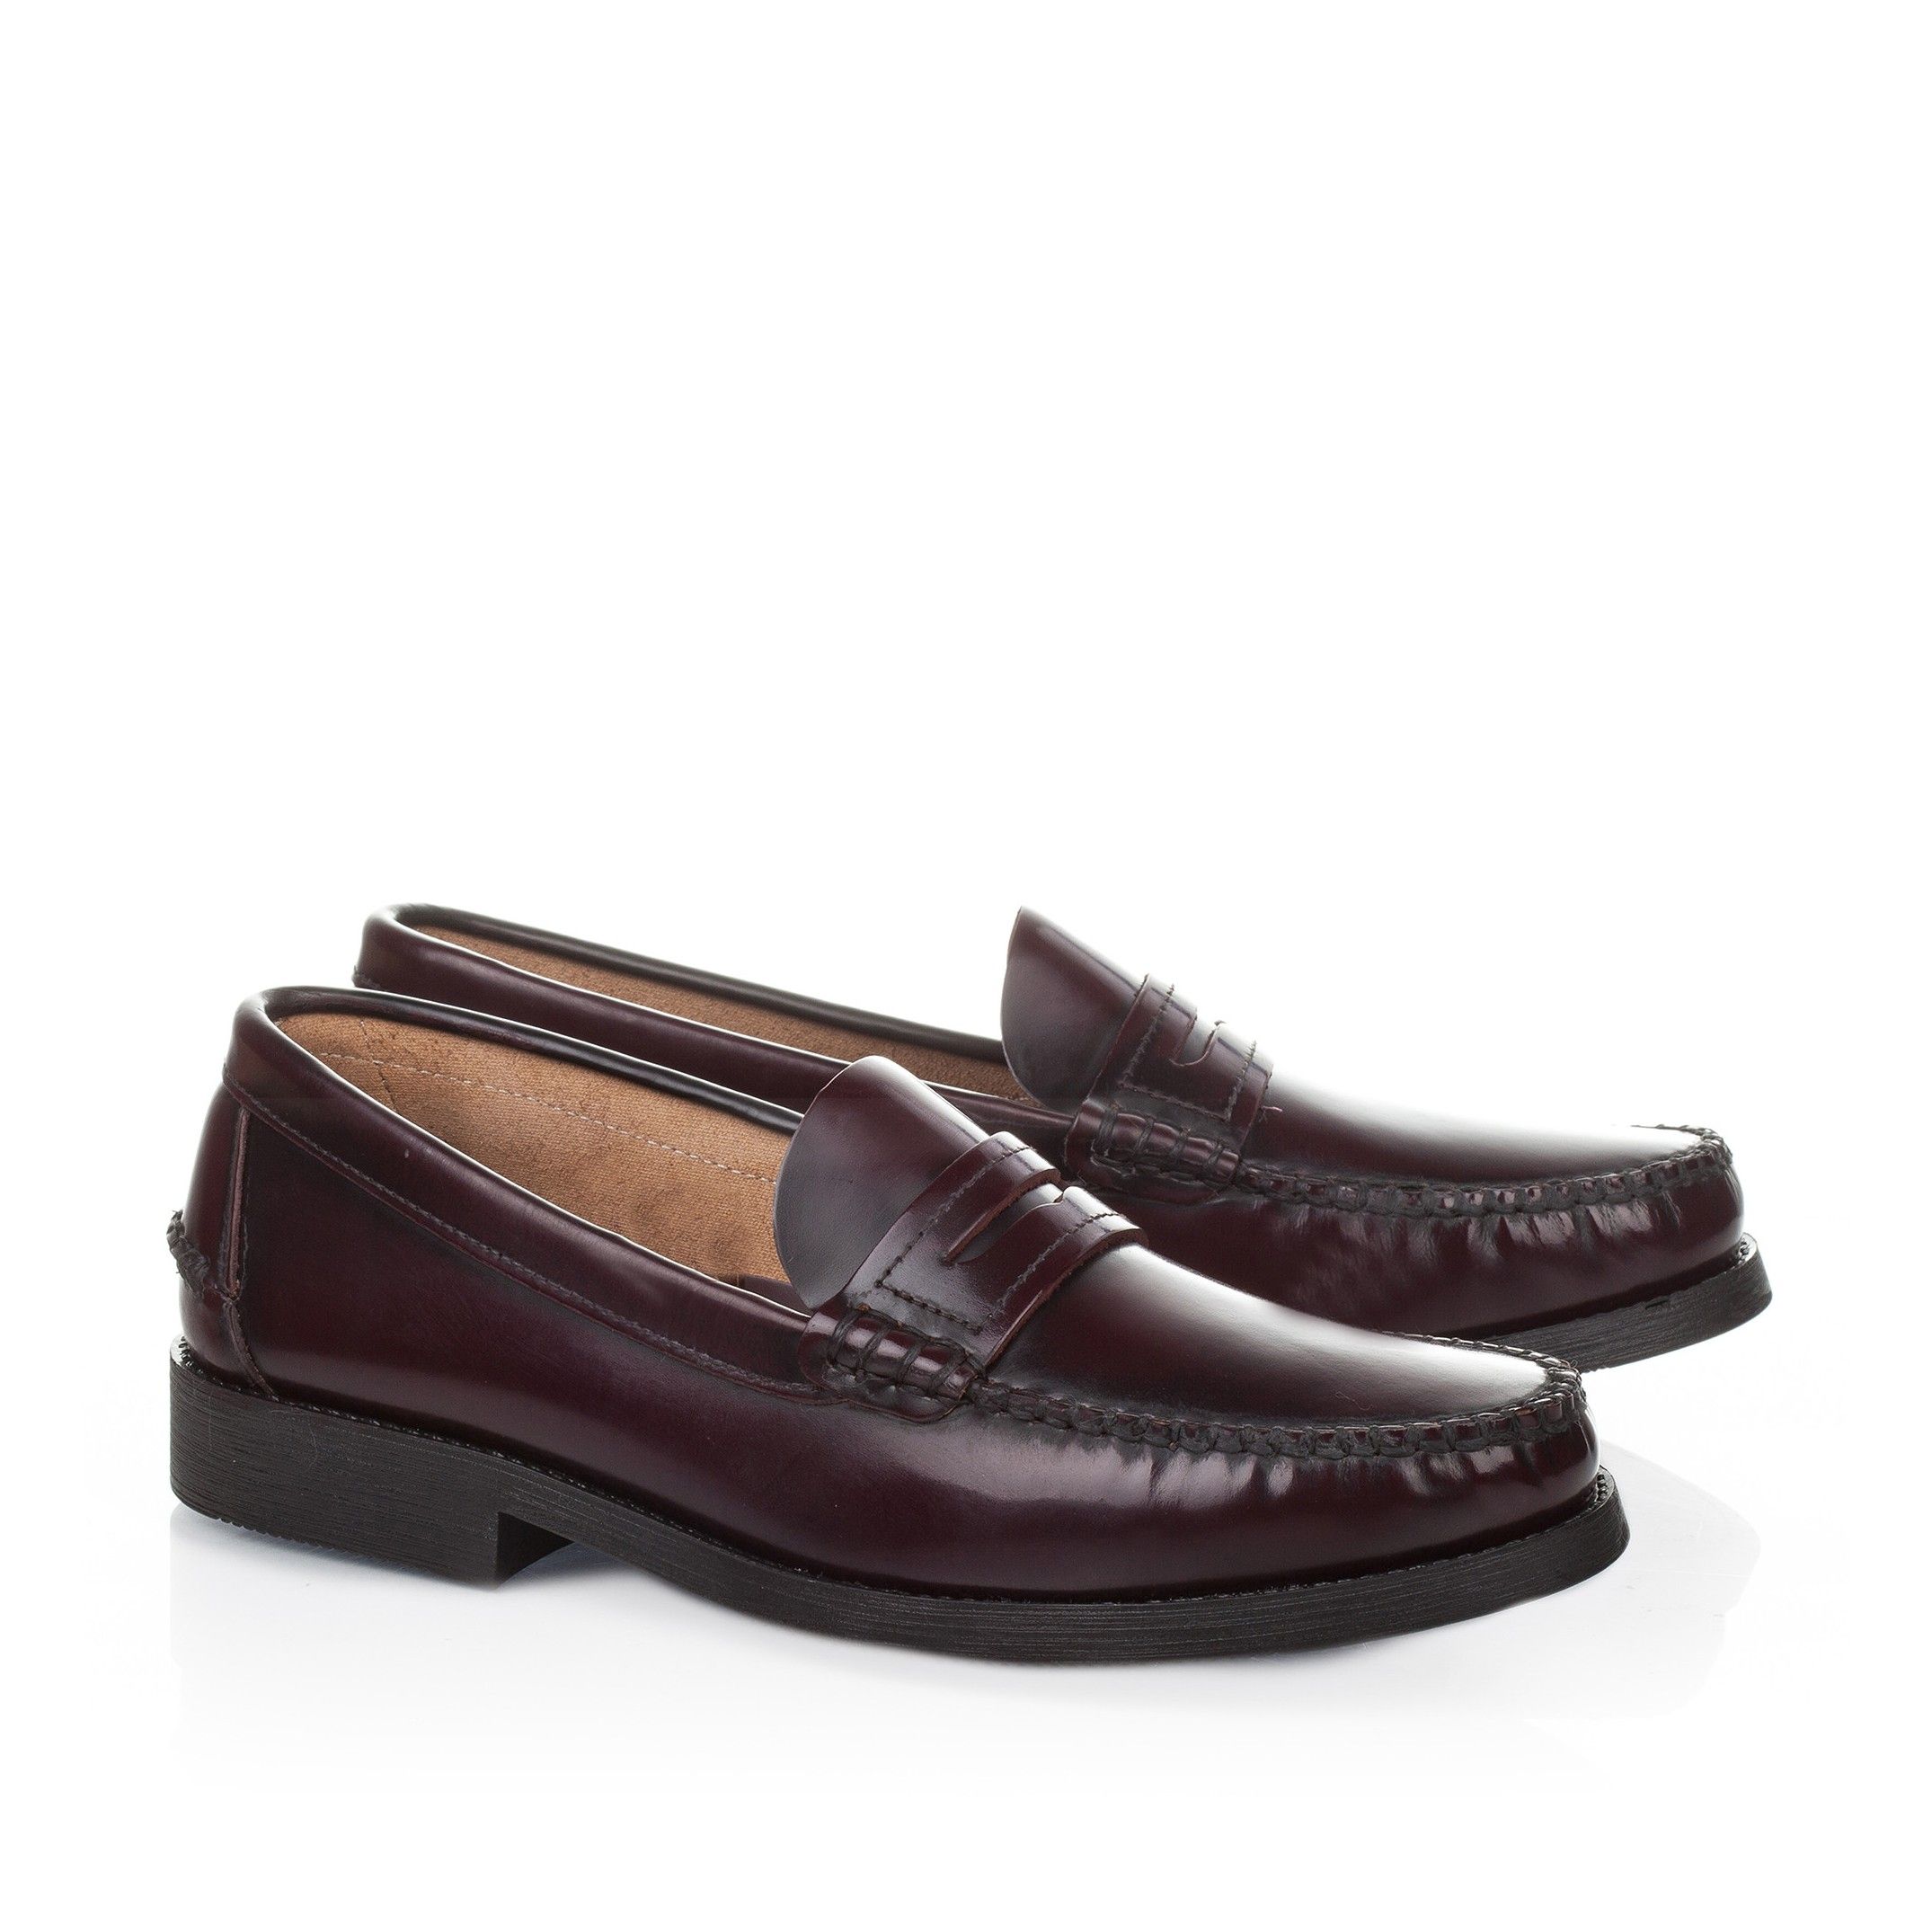 Florentic leather moccasins made in Spain. For men. Exterior made of leather. Interior made of leather. Rubber sole.